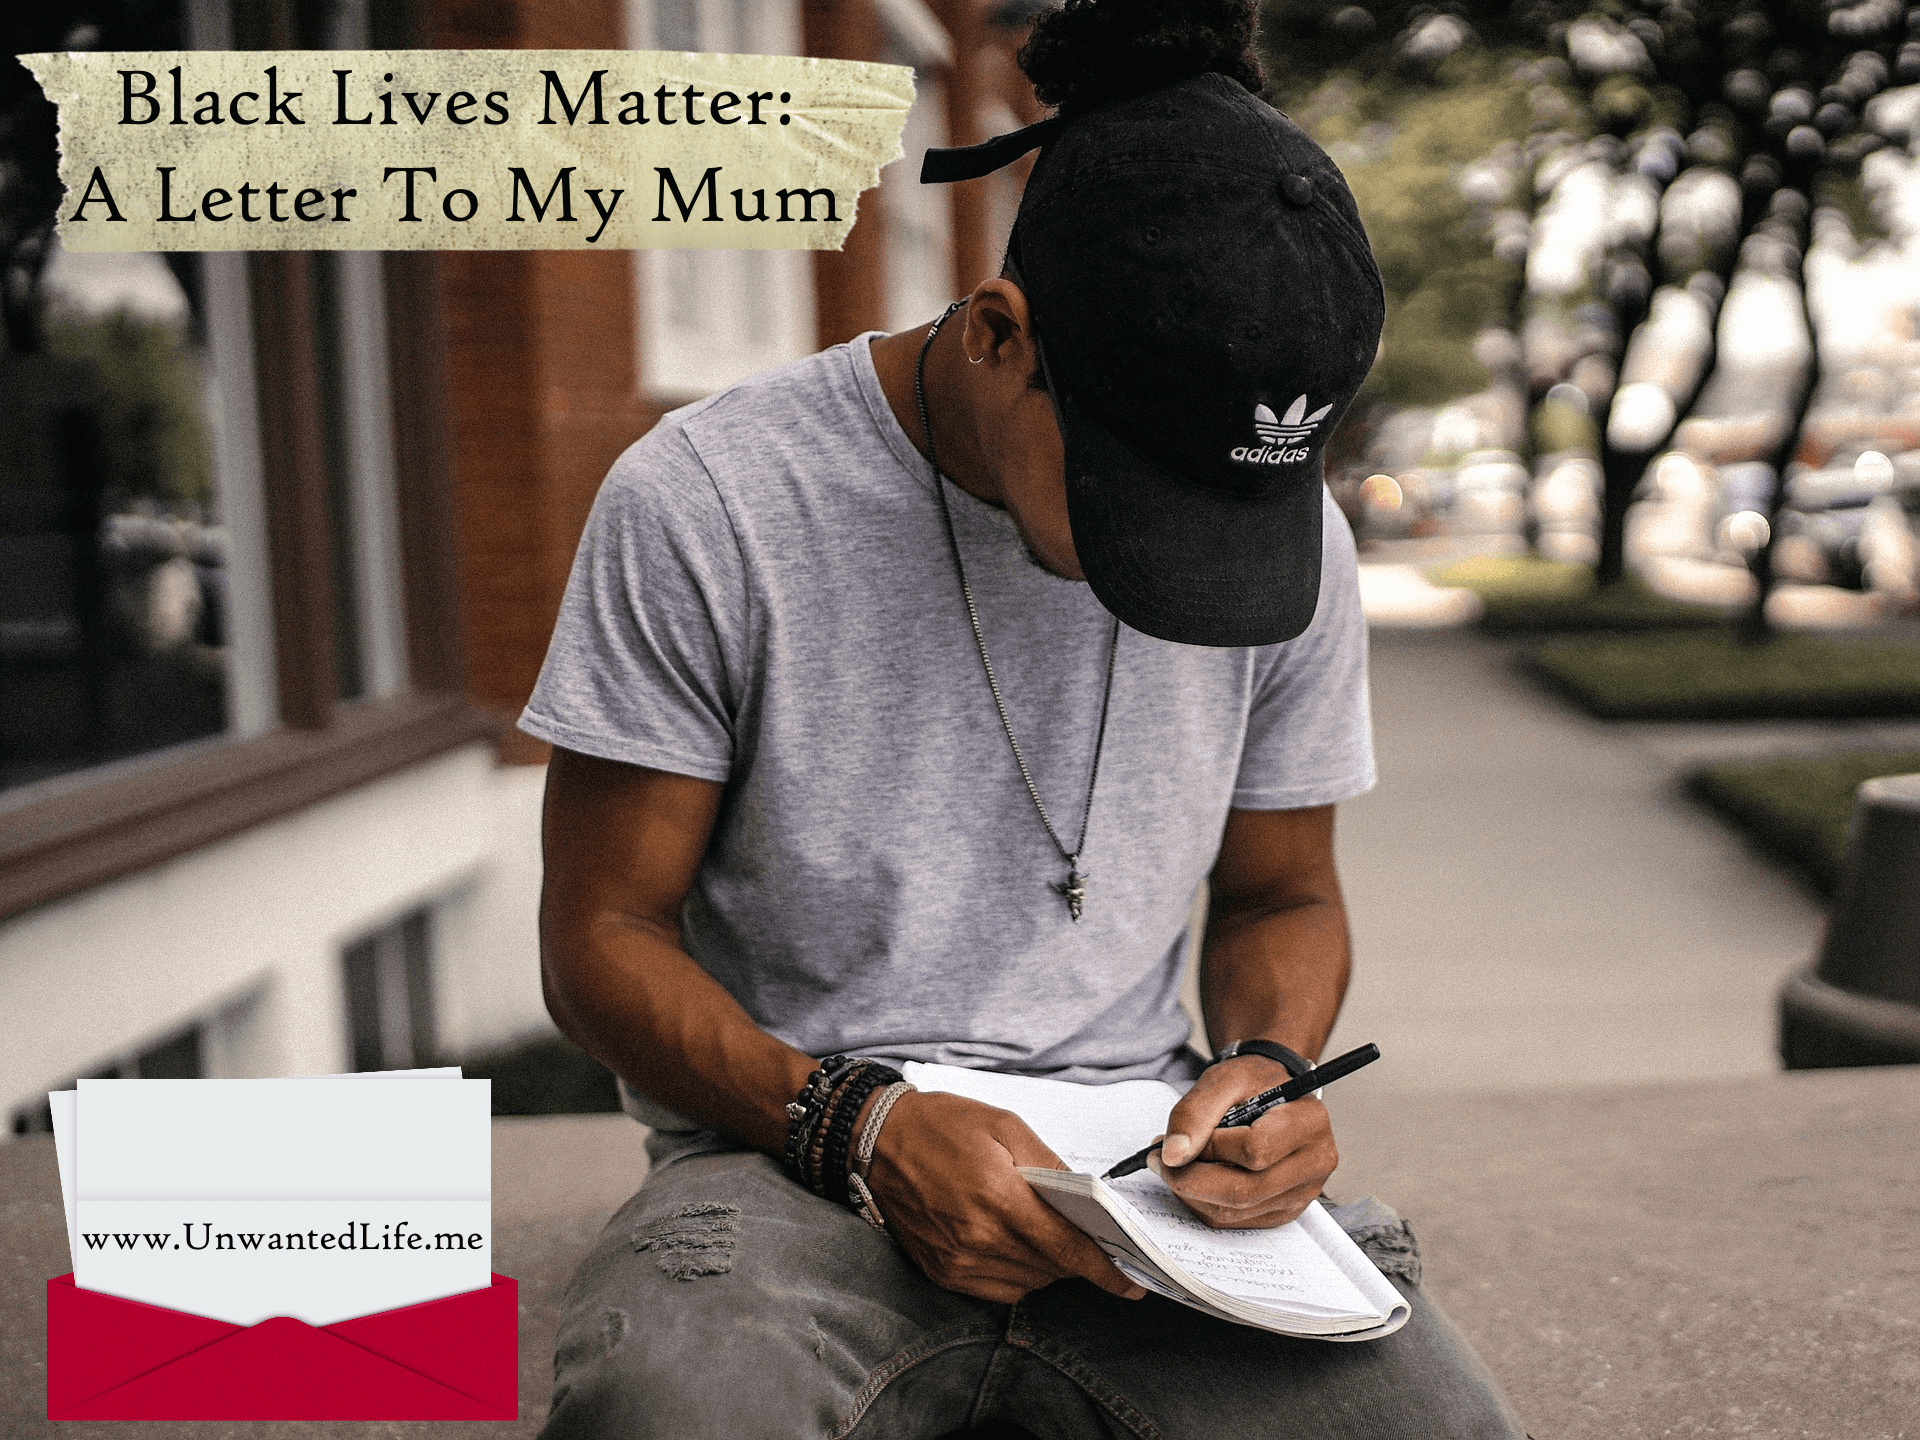 A photo of a young black man sitting outside and writing a letter in a notepad to represent - Black Lives Matter: A Letter To My Mum